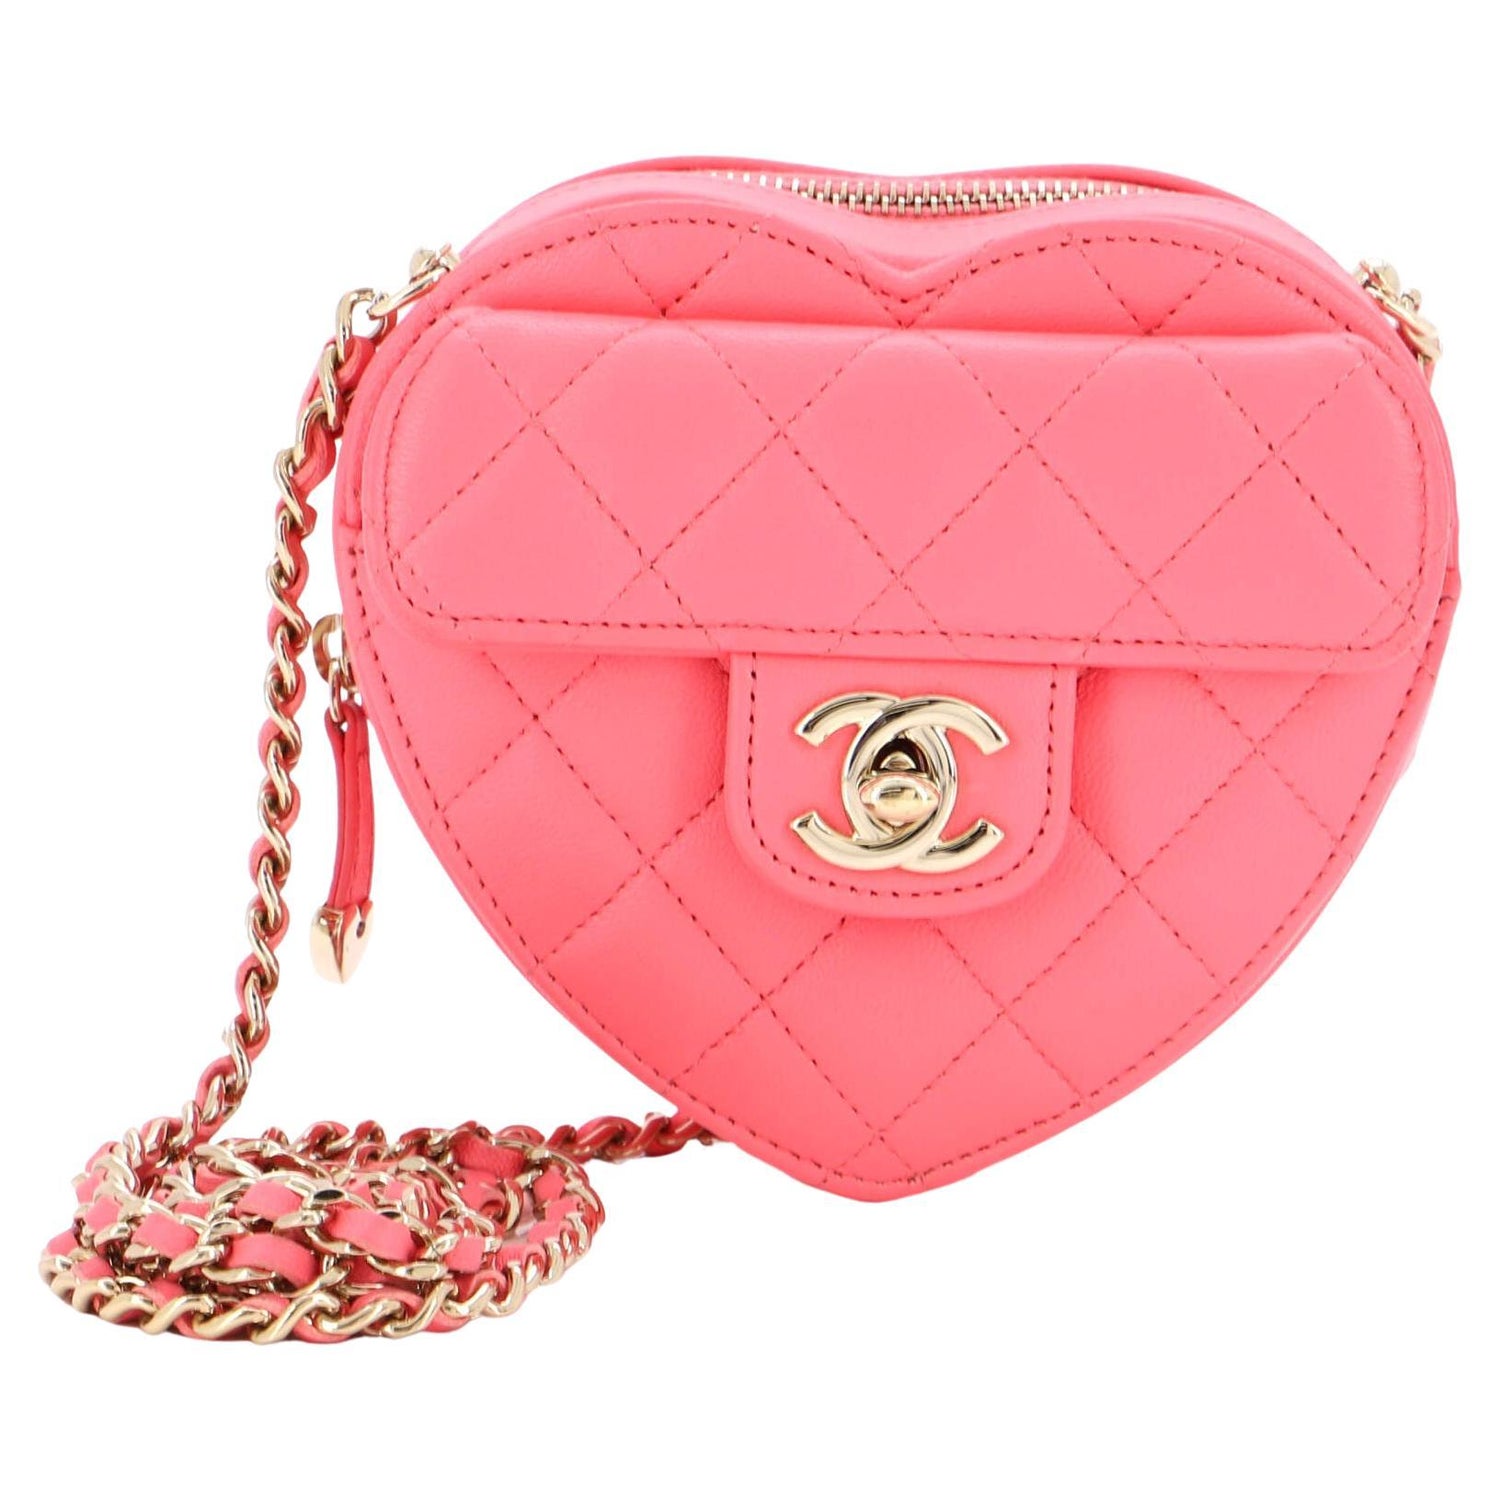 Chanel Heart Clutch - 6 For Sale on 1stDibs